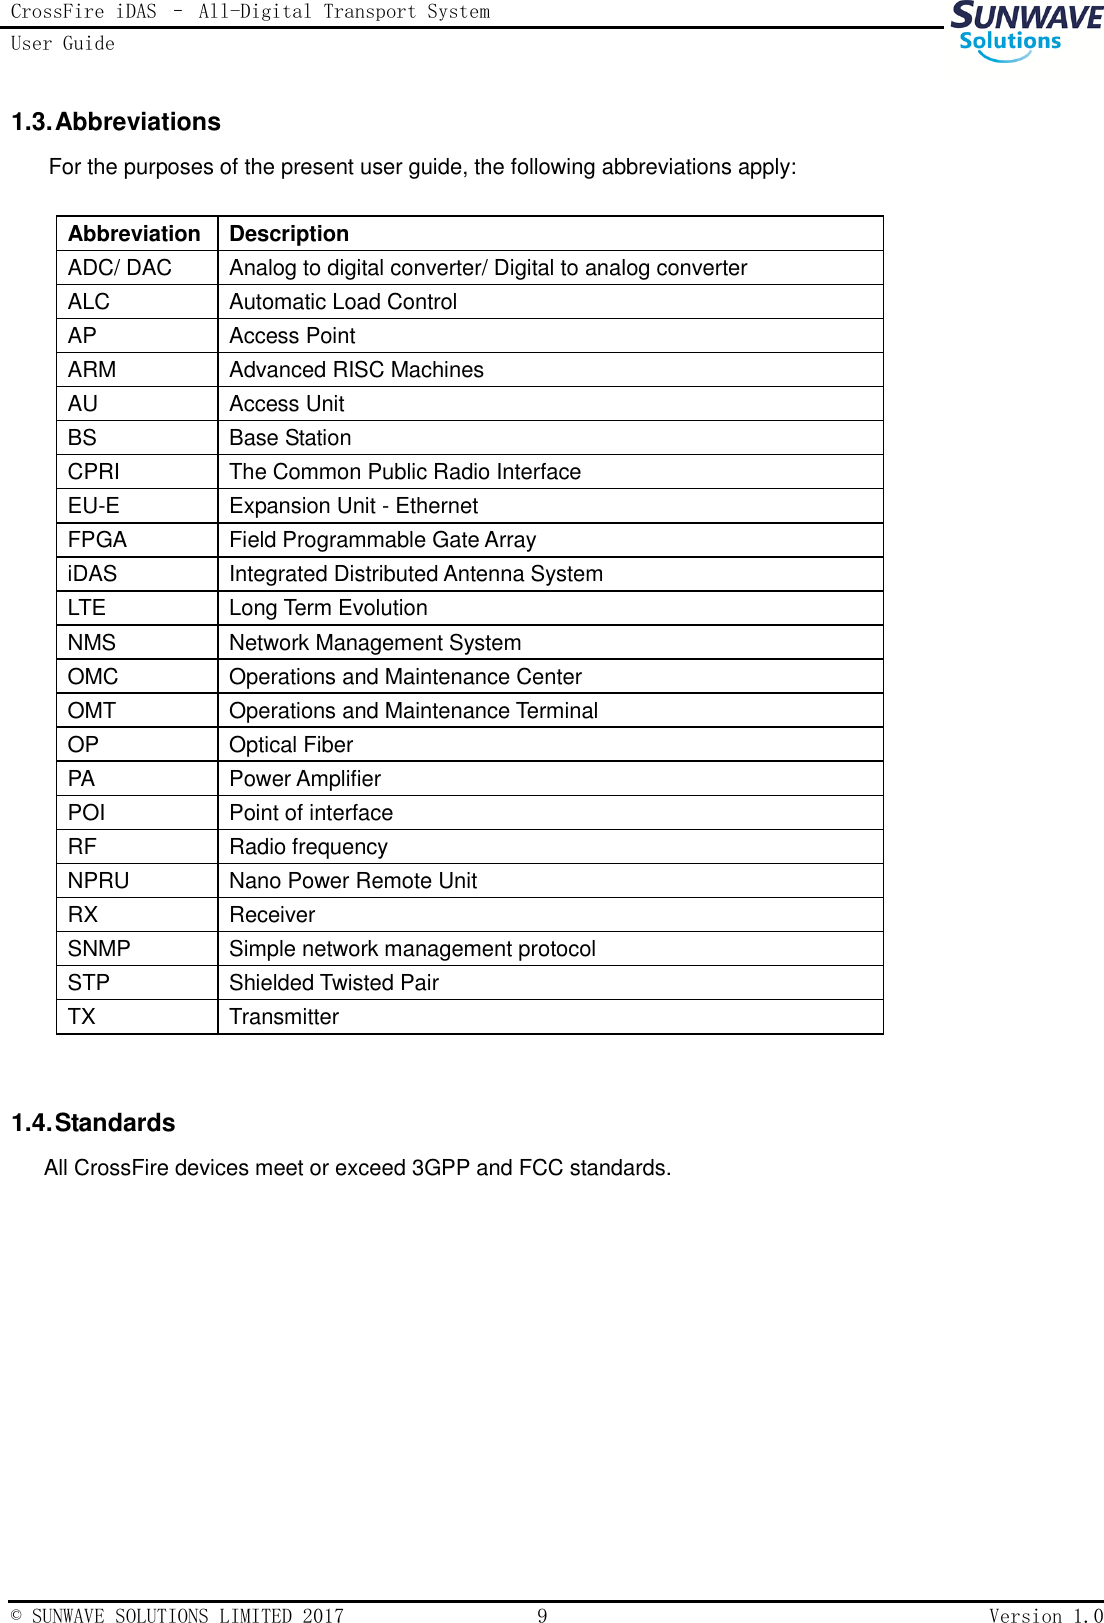 CrossFire iDAS – All-Digital Transport System User Guide   © SUNWAVE SOLUTIONS LIMITED 2017  9  Version 1.0  1.3. Abbreviations For the purposes of the present user guide, the following abbreviations apply:  Abbreviation Description ADC/ DAC Analog to digital converter/ Digital to analog converter ALC Automatic Load Control AP Access Point ARM Advanced RISC Machines AU Access Unit BS Base Station CPRI The Common Public Radio Interface EU-E Expansion Unit - Ethernet FPGA Field Programmable Gate Array iDAS   Integrated Distributed Antenna System LTE Long Term Evolution   NMS Network Management System OMC Operations and Maintenance Center OMT   Operations and Maintenance Terminal OP Optical Fiber PA Power Amplifier POI Point of interface RF Radio frequency NPRU Nano Power Remote Unit RX Receiver SNMP Simple network management protocol STP Shielded Twisted Pair TX Transmitter  1.4. Standards All CrossFire devices meet or exceed 3GPP and FCC standards.  